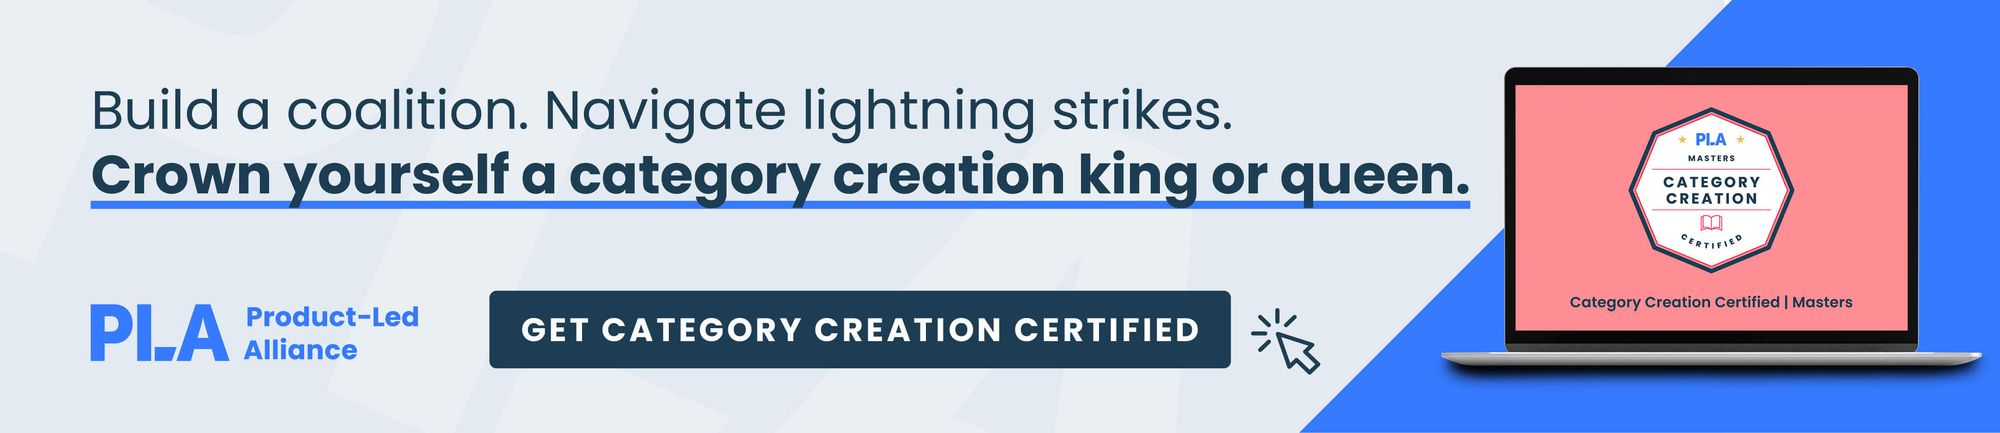 Category Creation Certified Masters